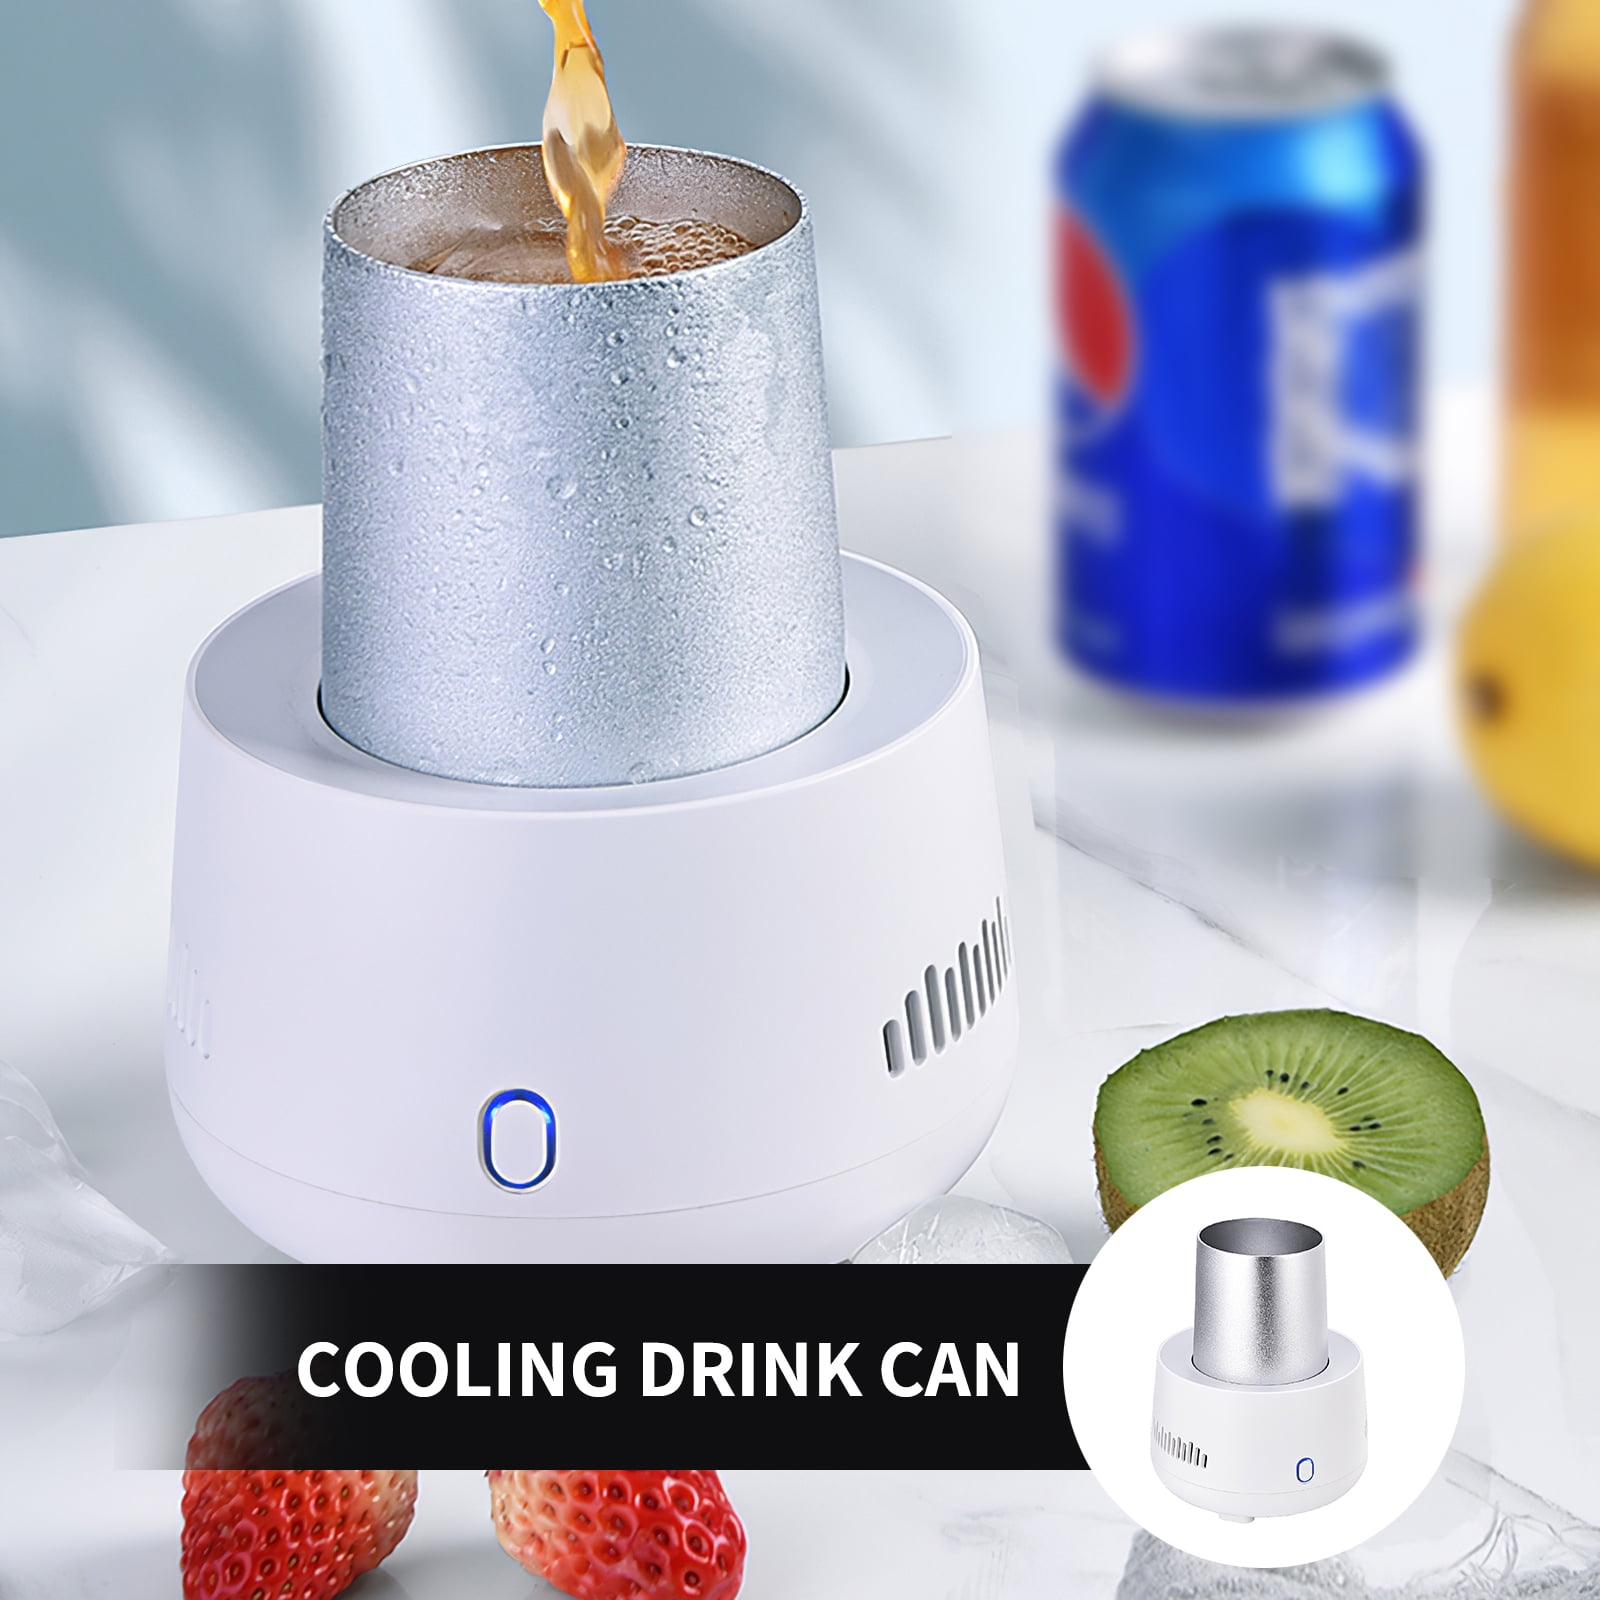 MagiDeal Portable Mini Refrigerator Electric Summer Drink Cooler Kettle Can Instant Quick Cooling Cup Ice Marker Office Cold Drink Machine Beverage Electronic Single Bottle Chiller for Home Travel 